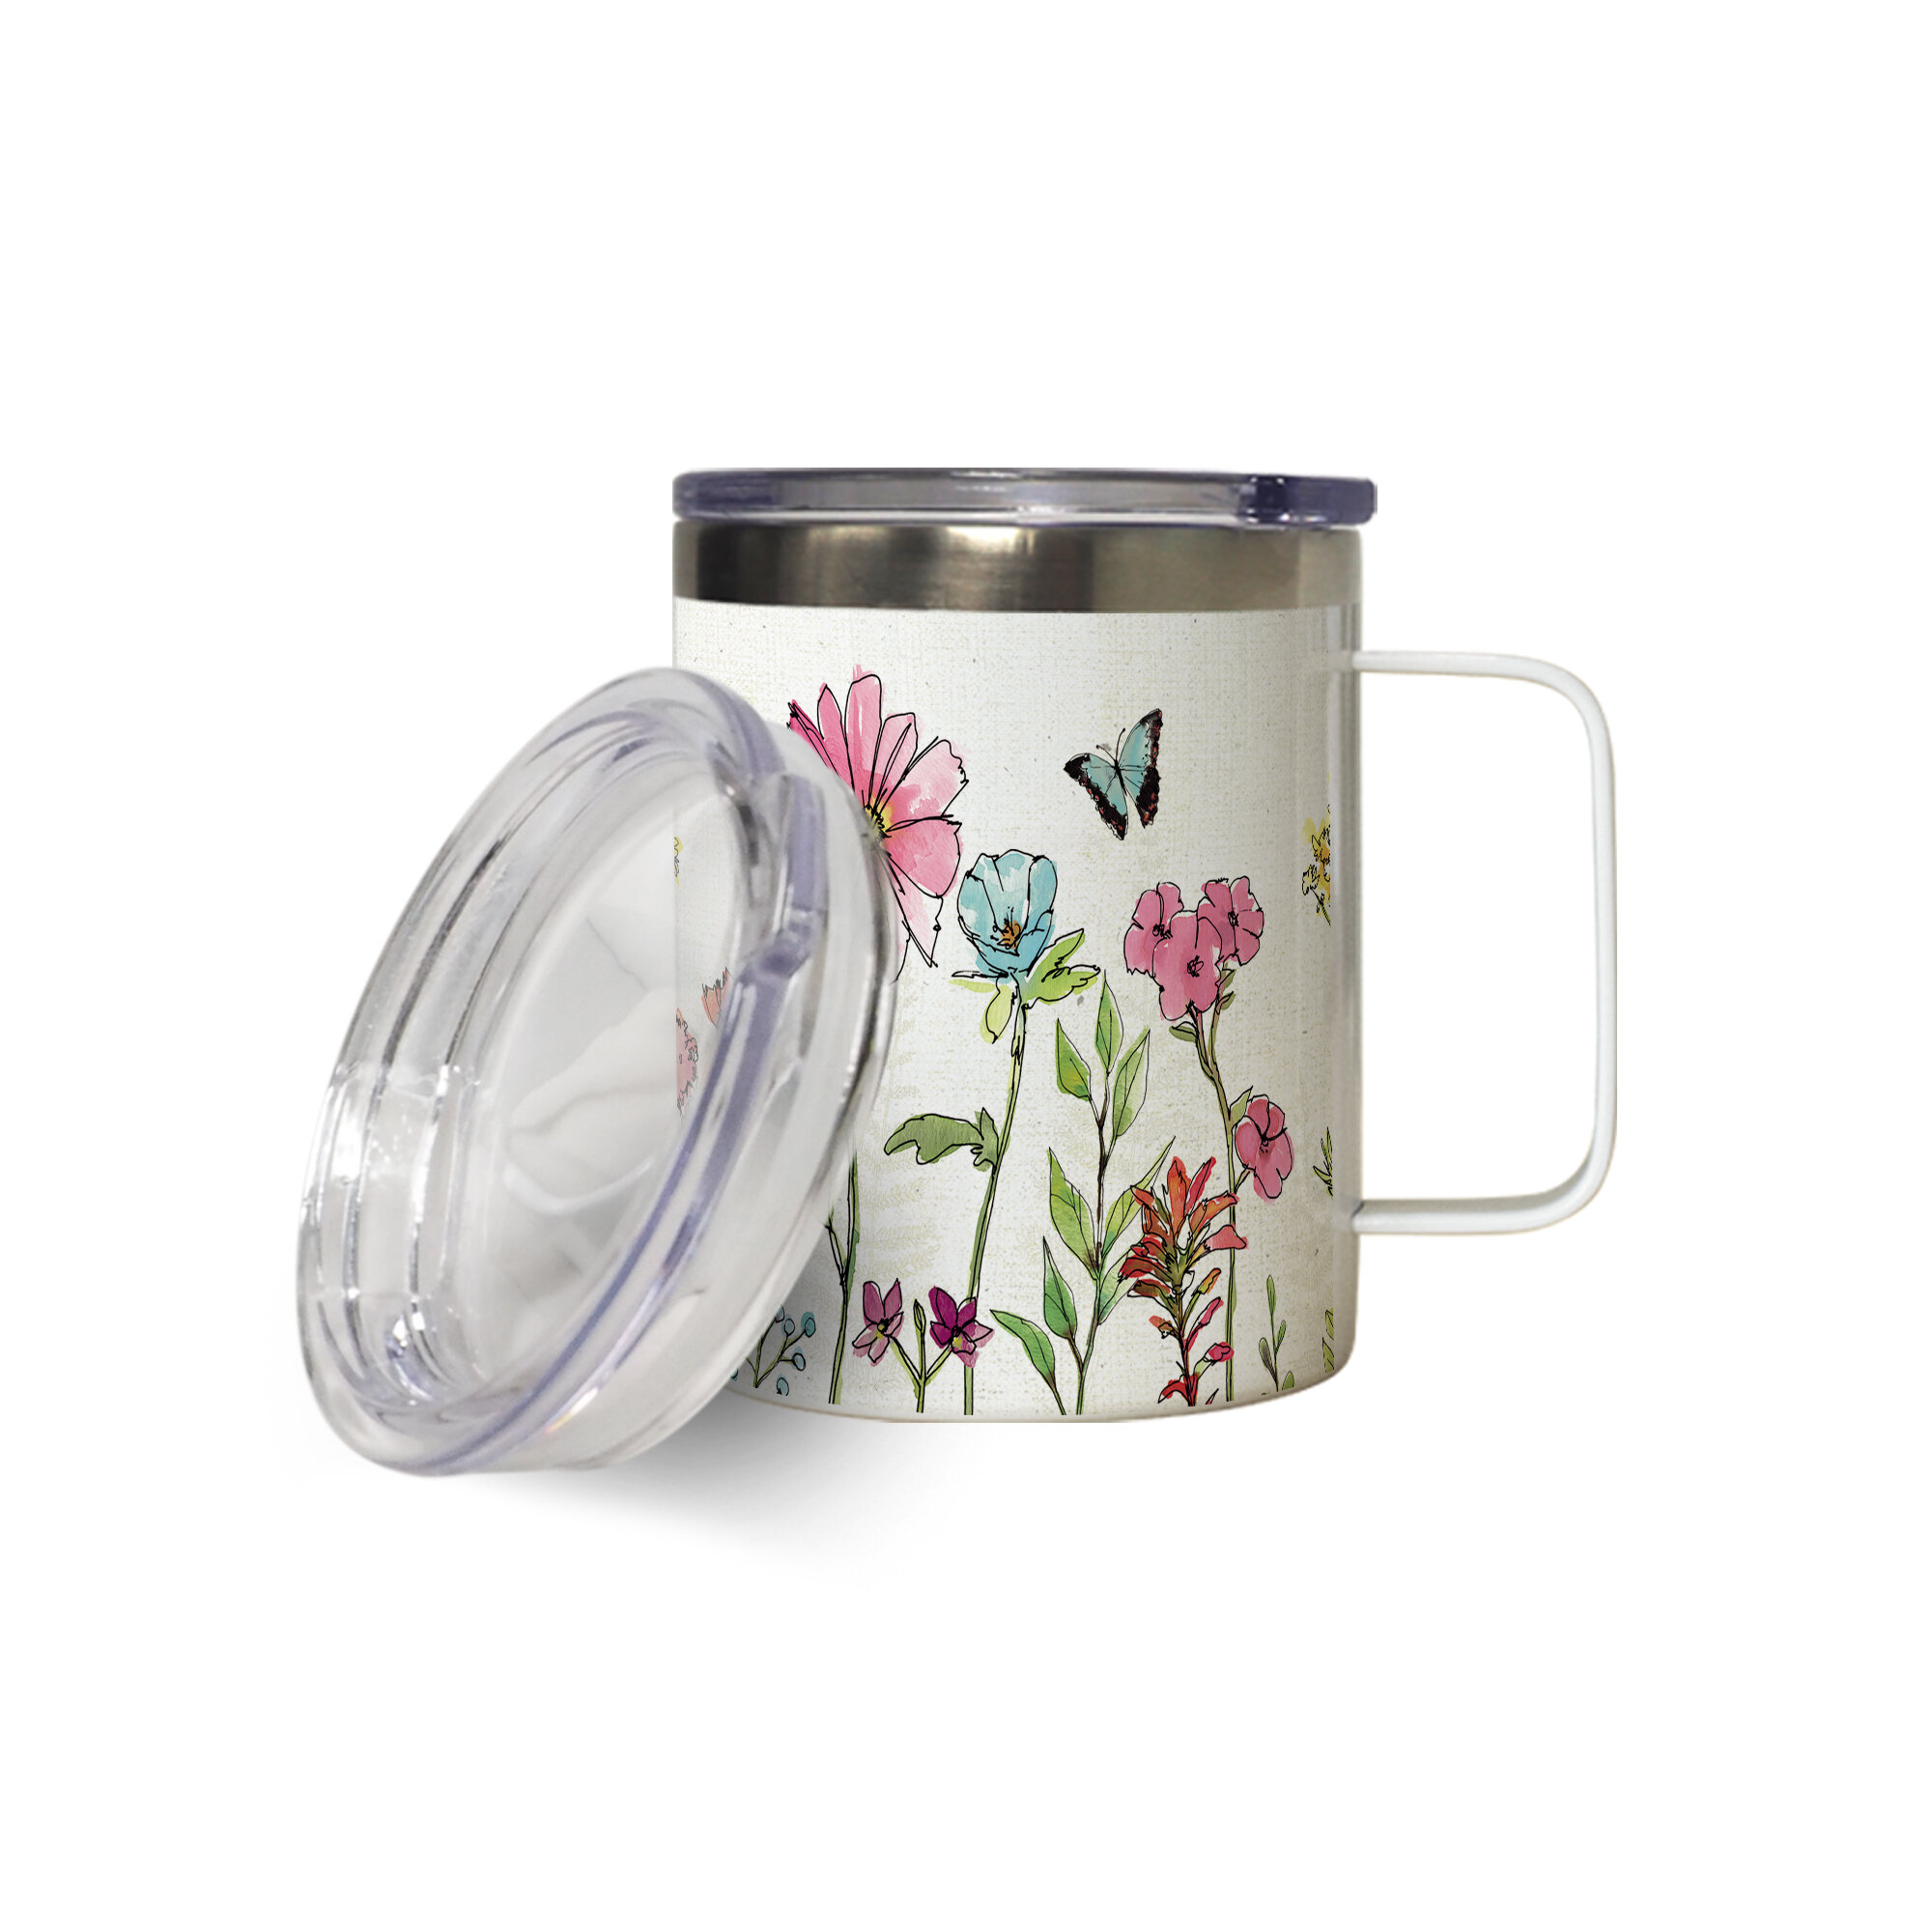 Details about   Floral in White Stainless Steel Travel Mug 